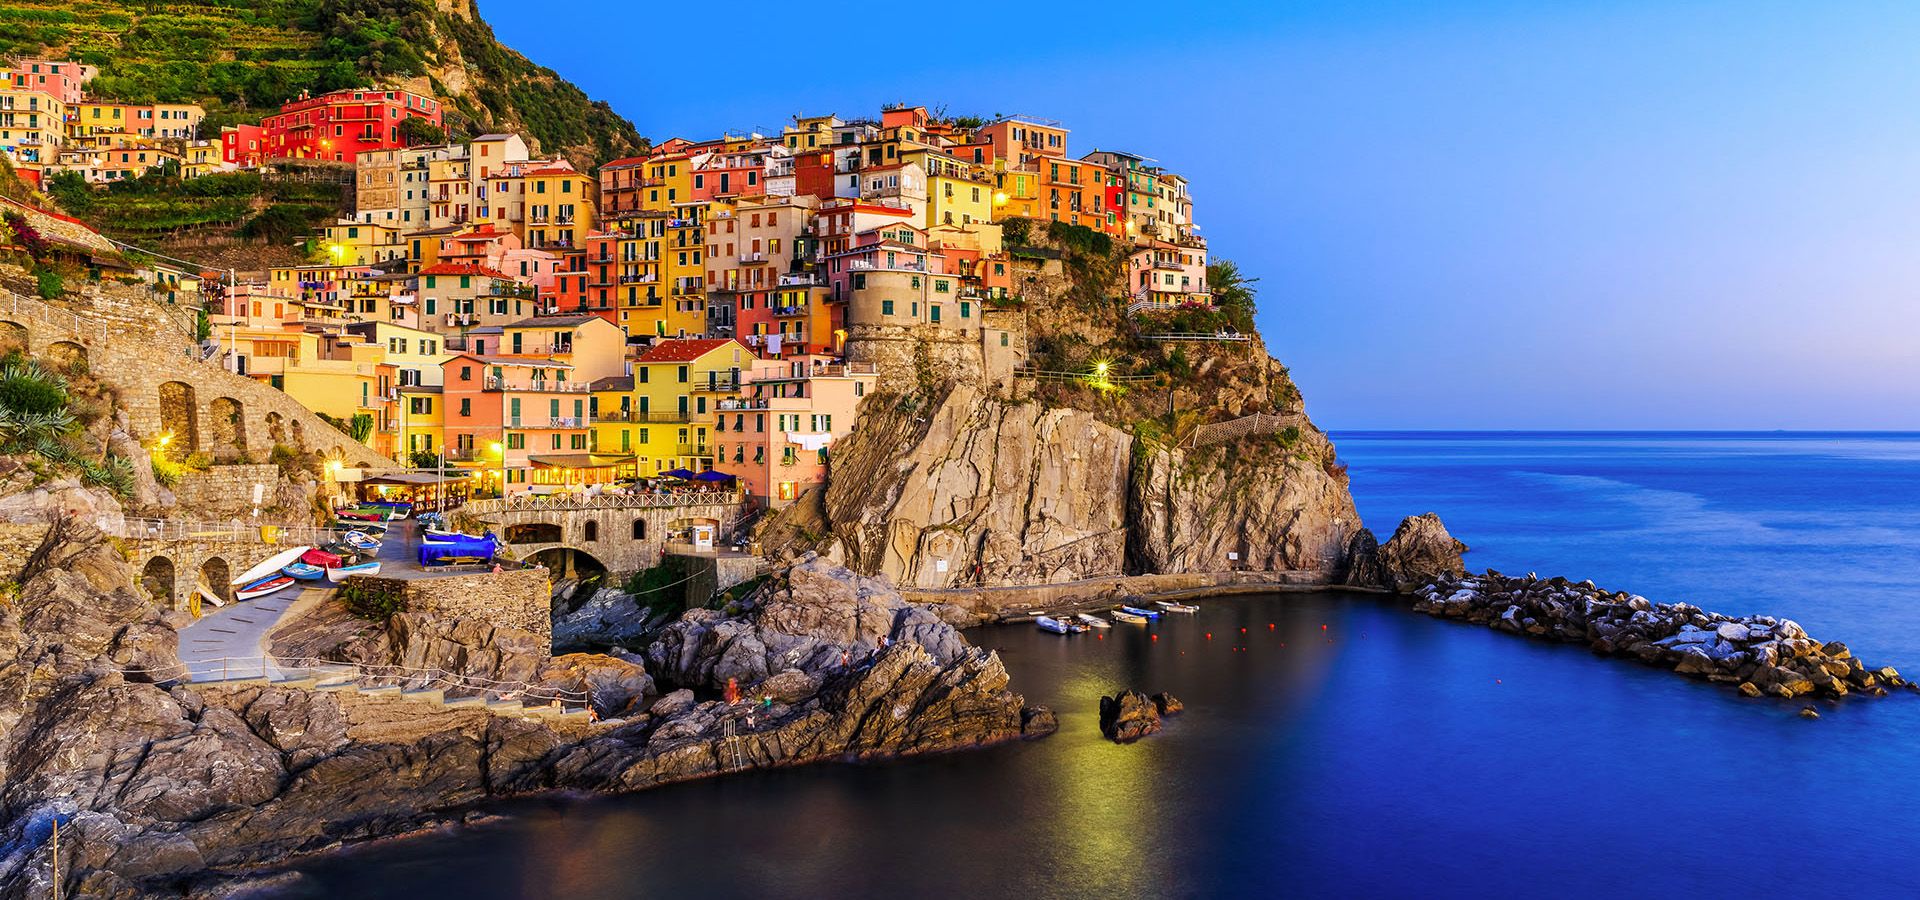 Angelo's Boat Tours in Cinque Terre